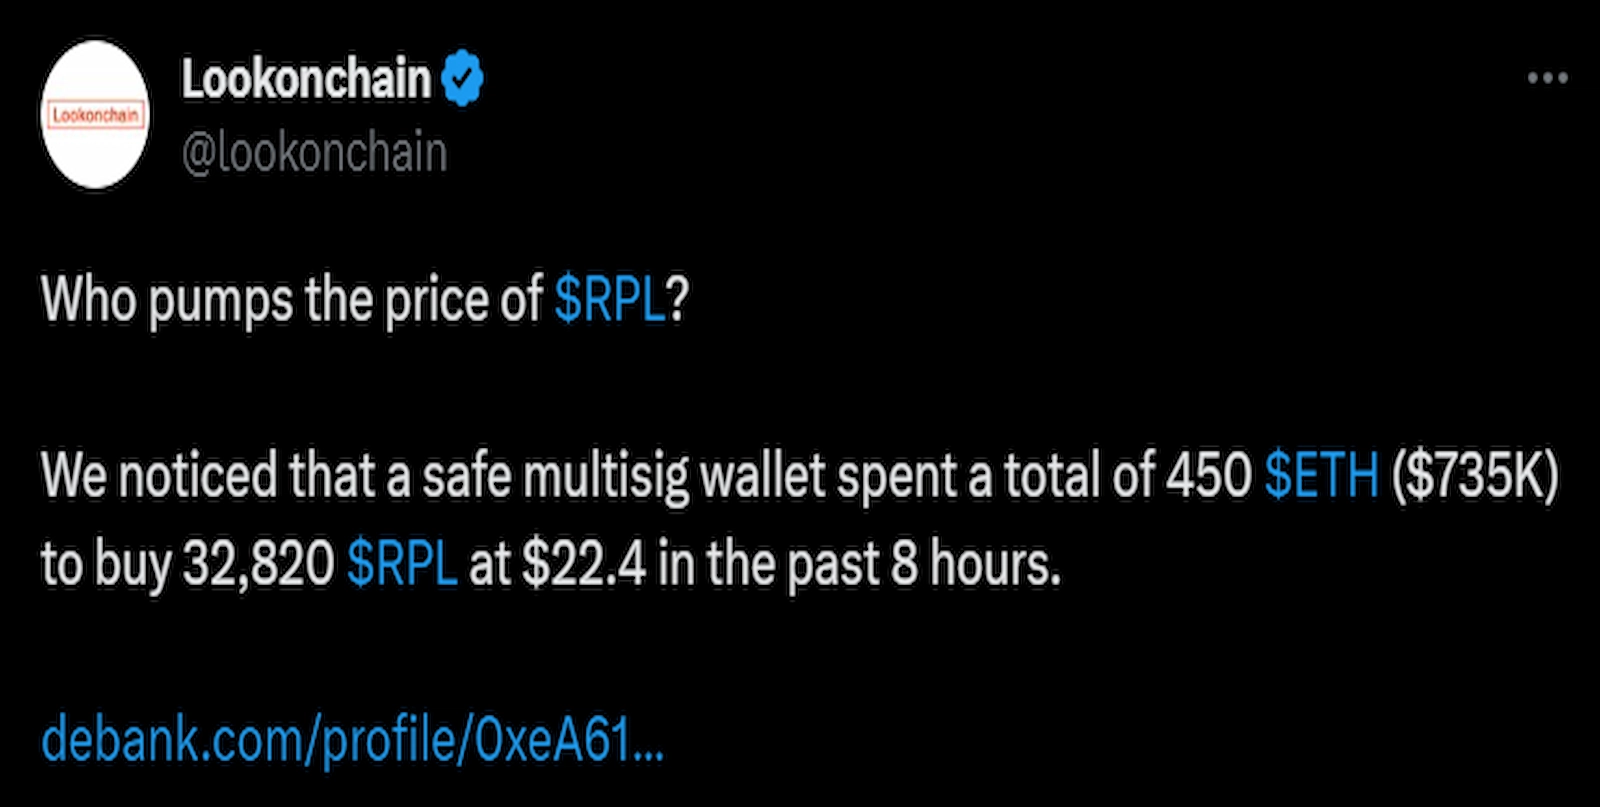 A mysterious wallet purchased 32,820 RPL tokens.